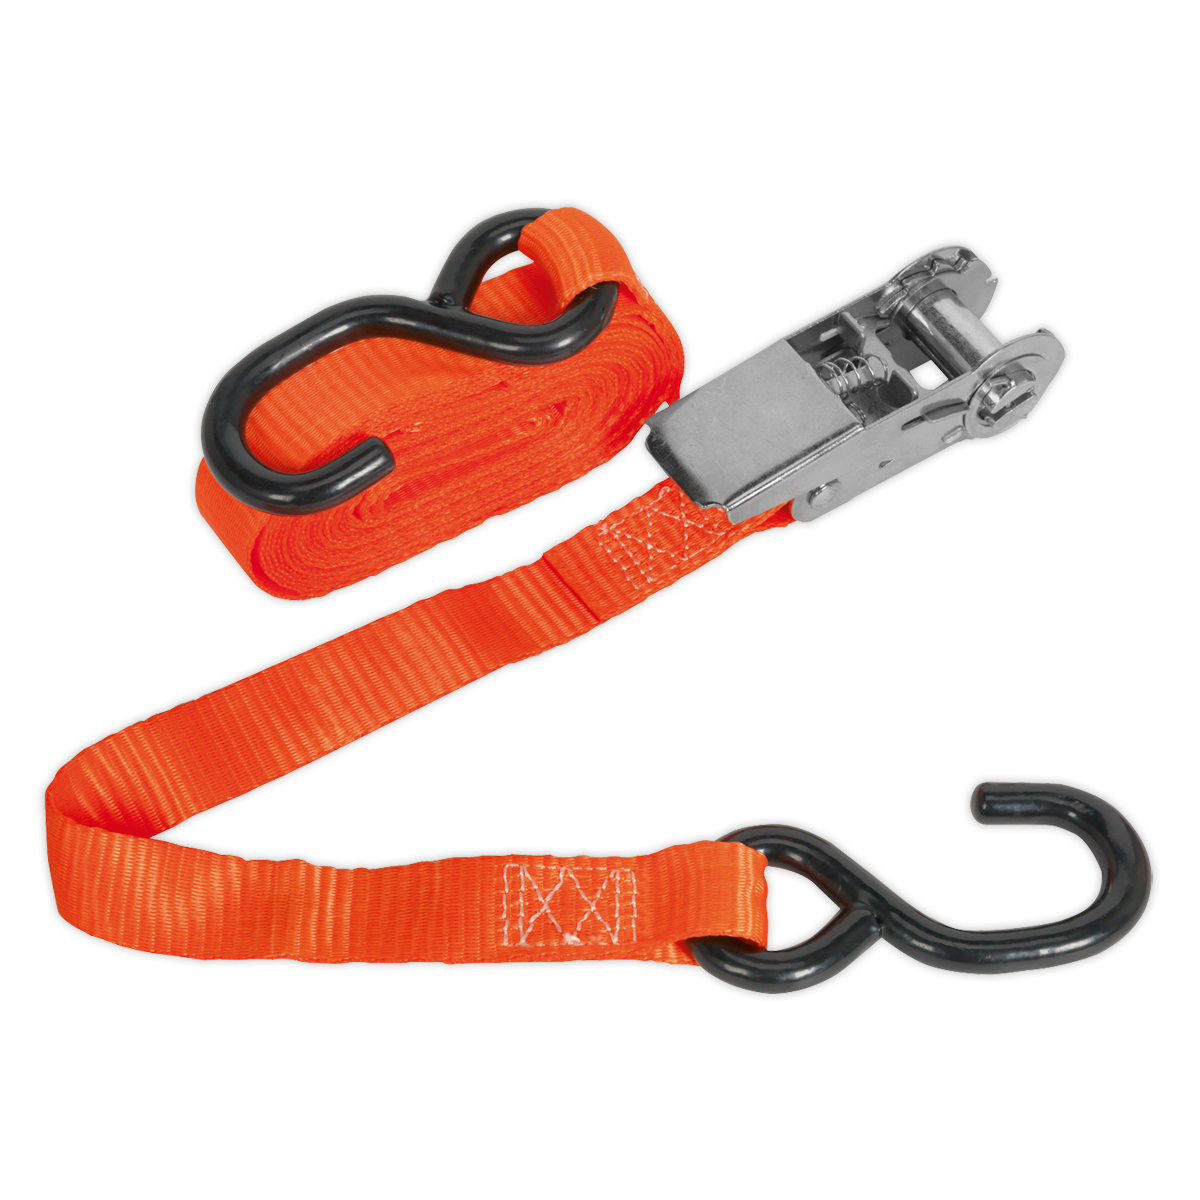 Ratchet Strap 25mm x 4.5m Polyester Webbing with S-Hook 800kg Breaking Strength